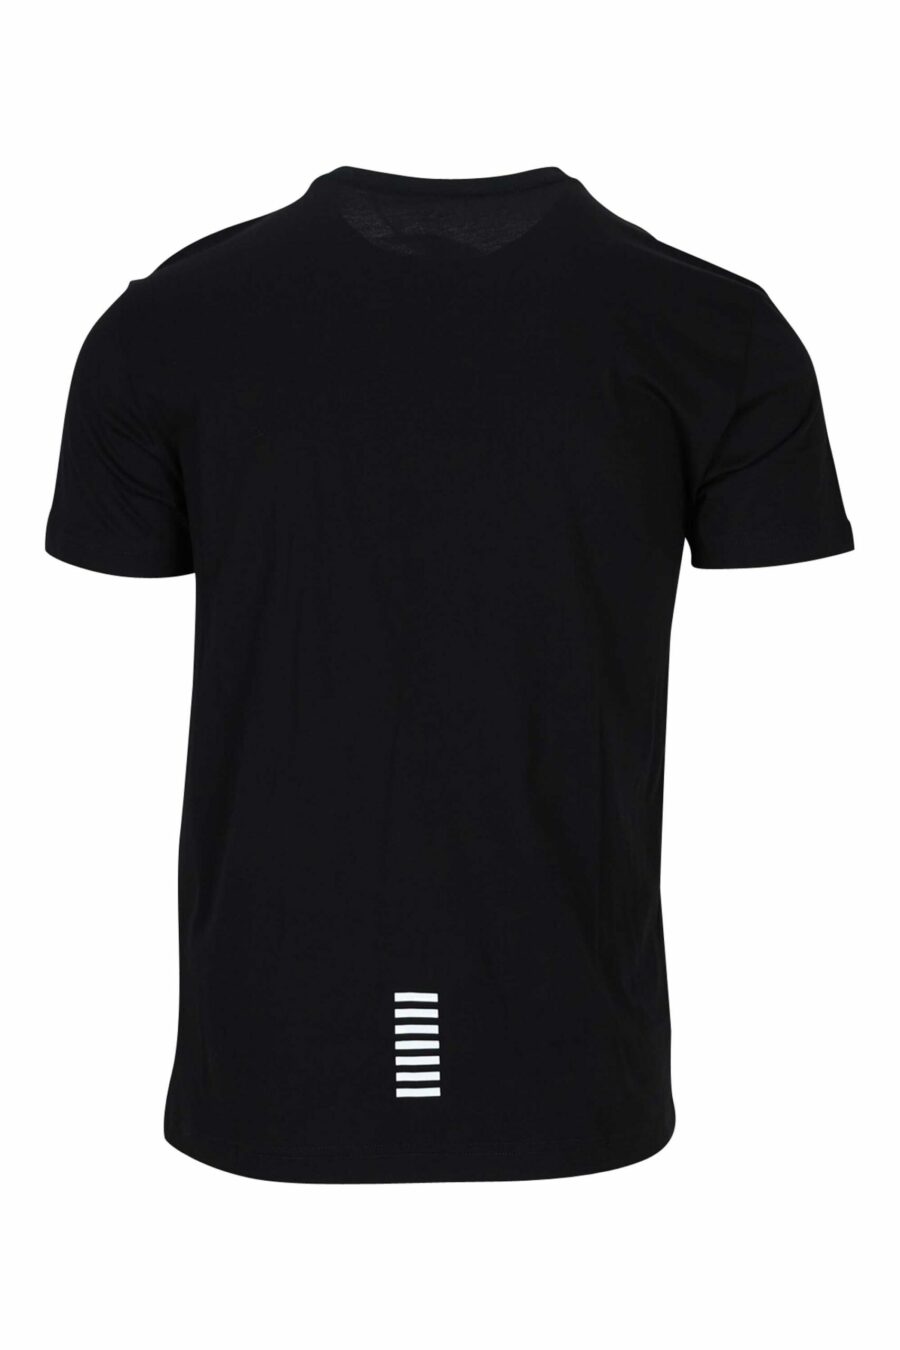 T-shirt black with white "lux identity" gradient minilogue - 8055187167147 1 scaled